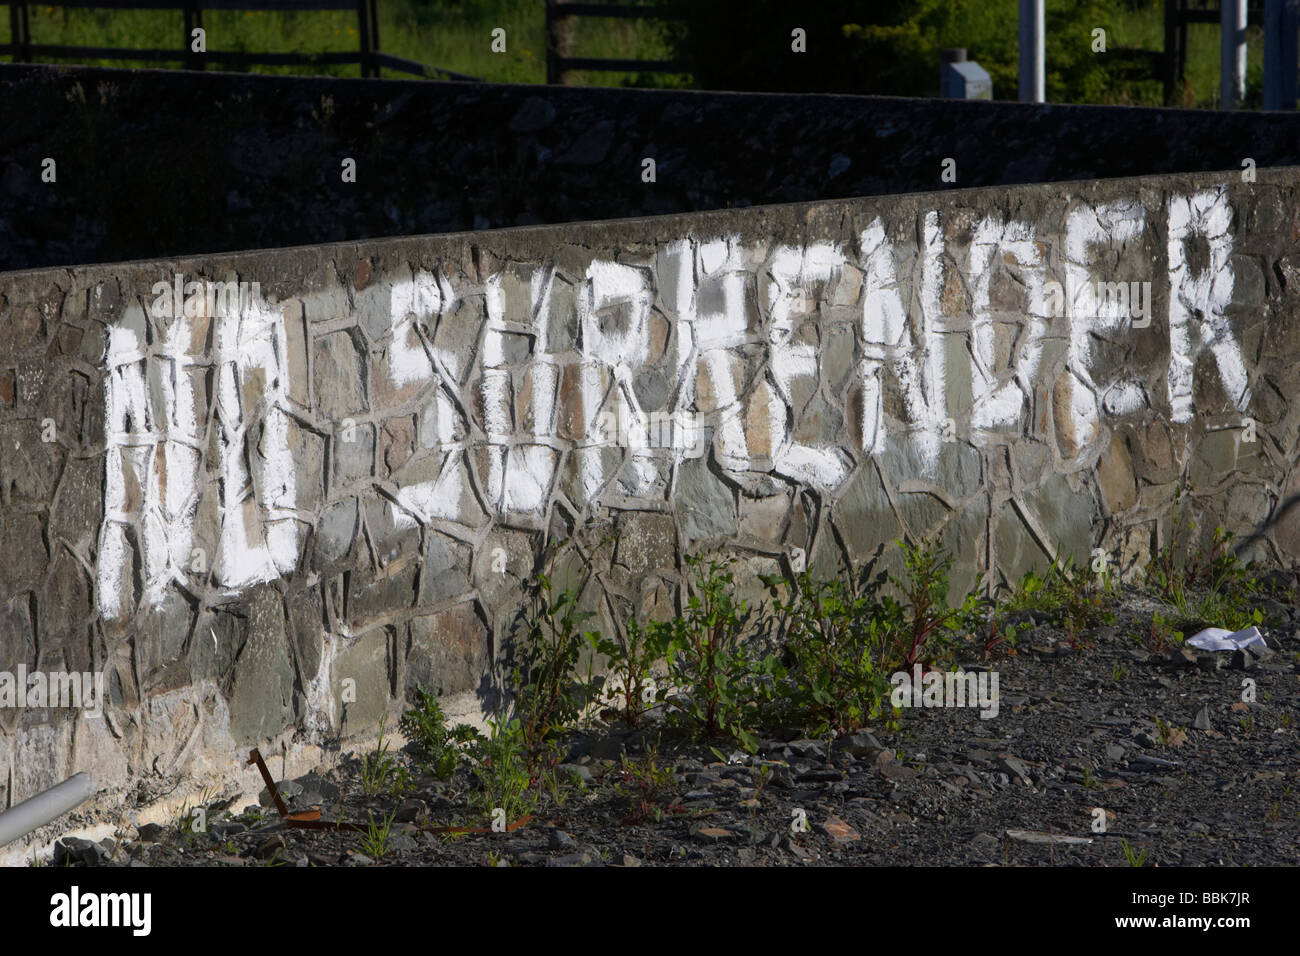 ulster loyalist no surrender graffiti painted onto a wall in a unionist protestant area of northern ireland Stock Photo